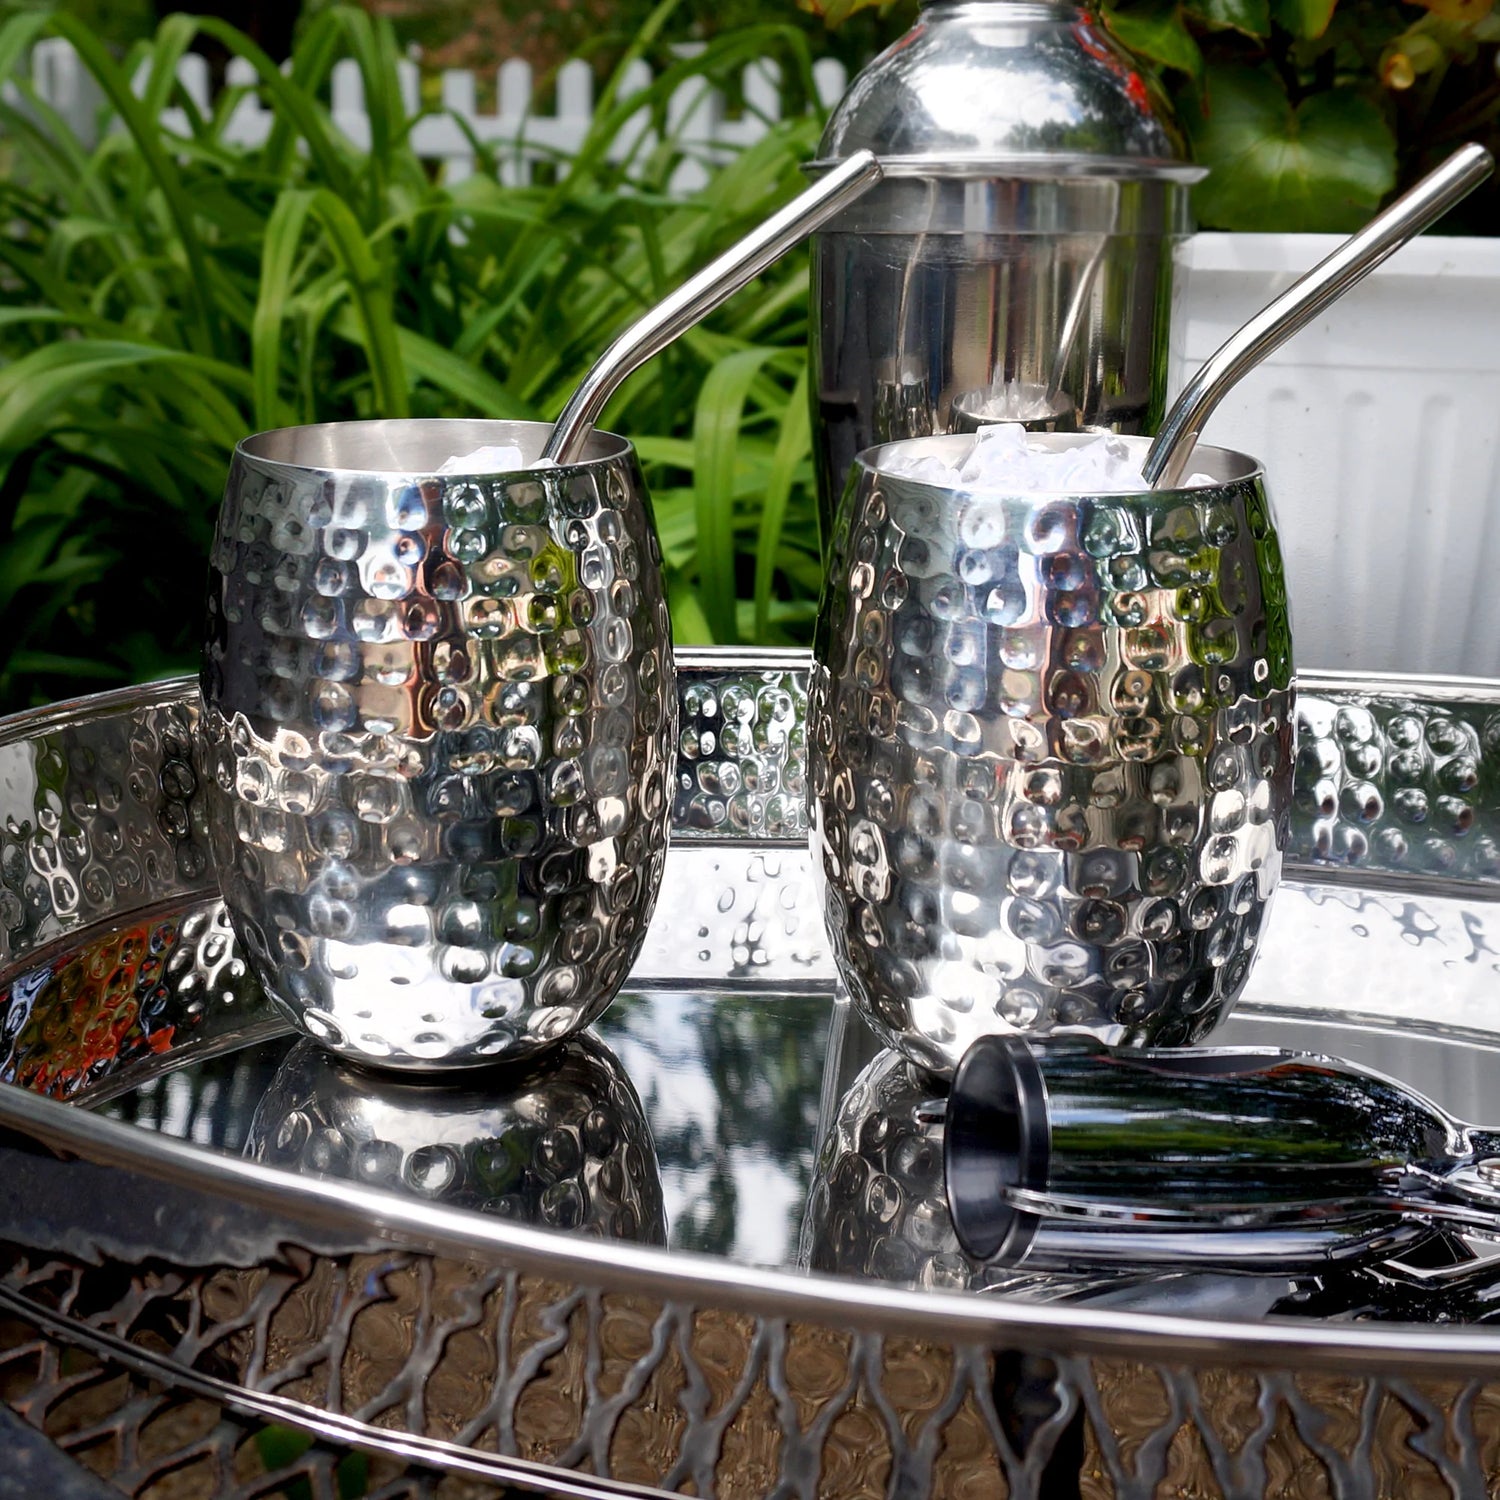 Cocktail tumblers made of stainless steel.  Cups are insulated to max chill time of drinks.  This is a set of two to share with your party guests in the kitchen, bar, dining room, or patio garden.